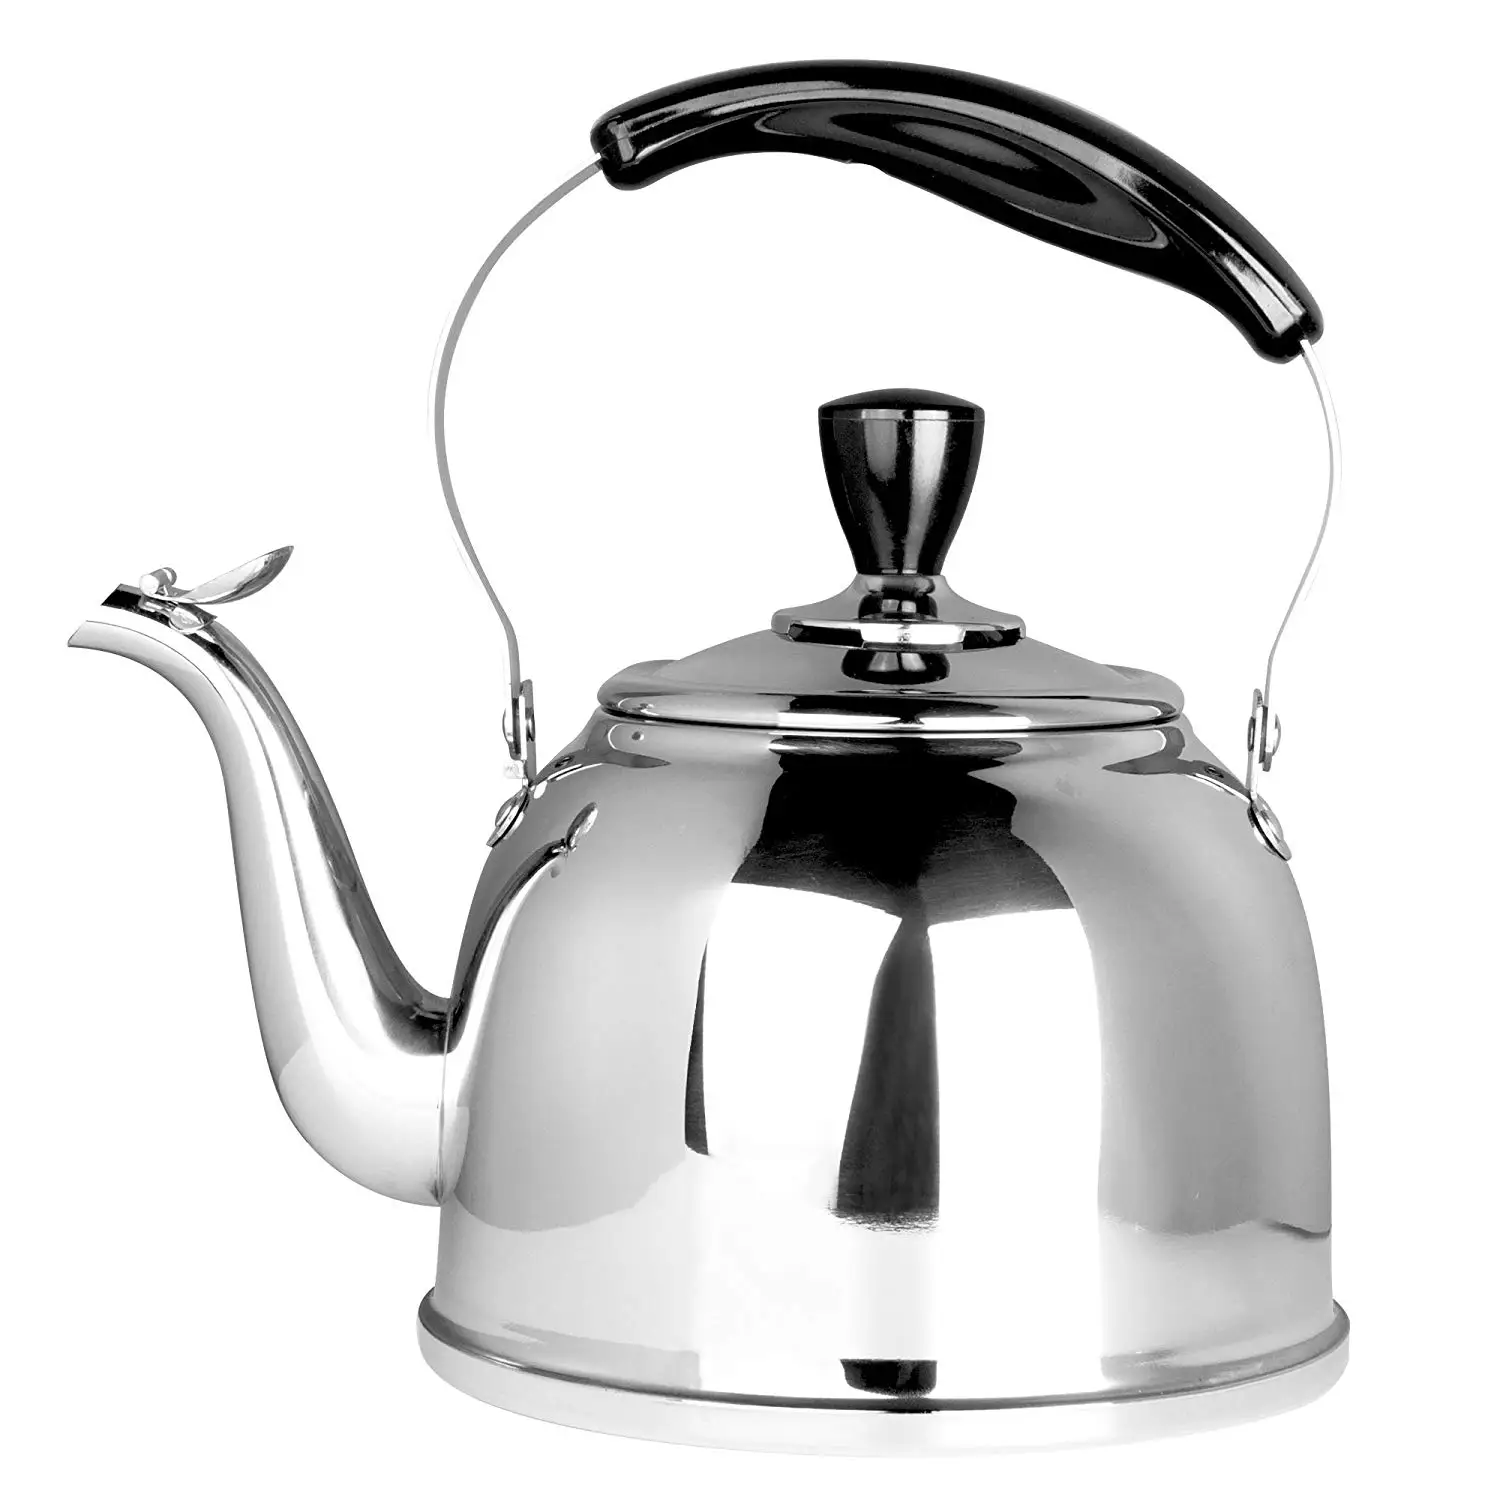 

Stainless Steel Whistling Tea Kettle Stove Top Teapot Pot, Thin Base, Lightweight, Fast Boiling, 2L